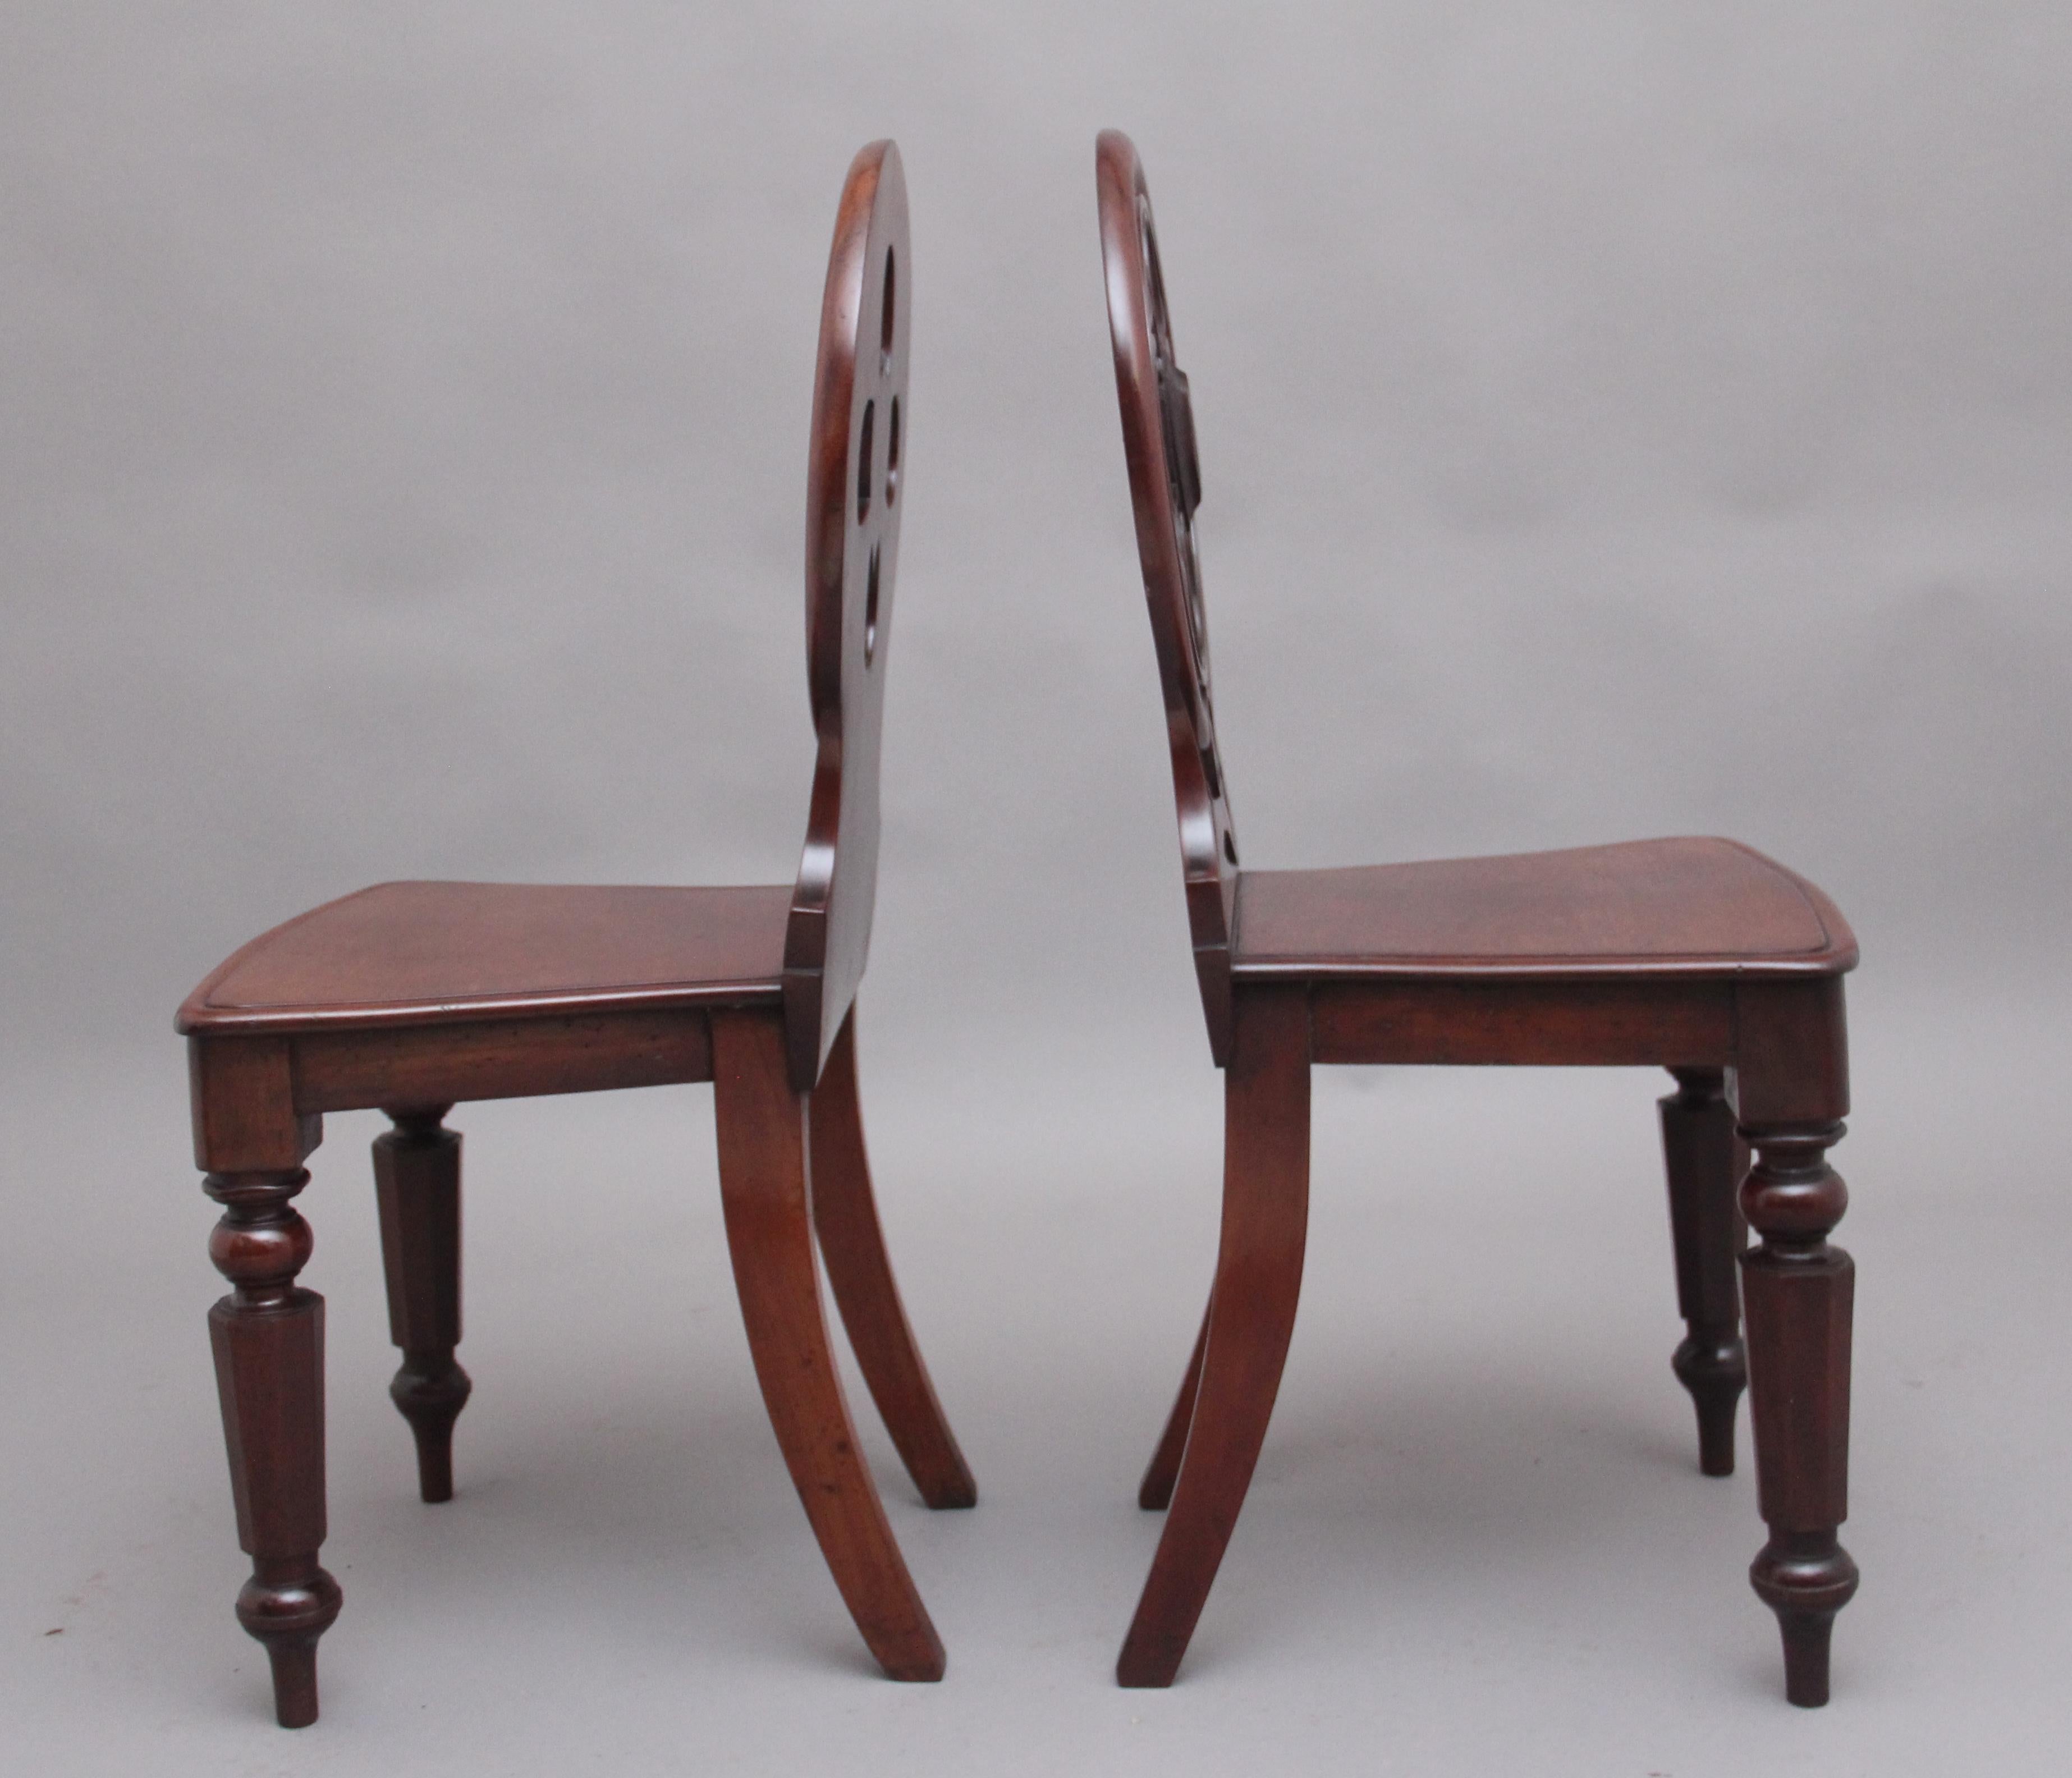 Pair of 19th Century Antique Mahogany Hall Chairs In Good Condition For Sale In Martlesham, GB